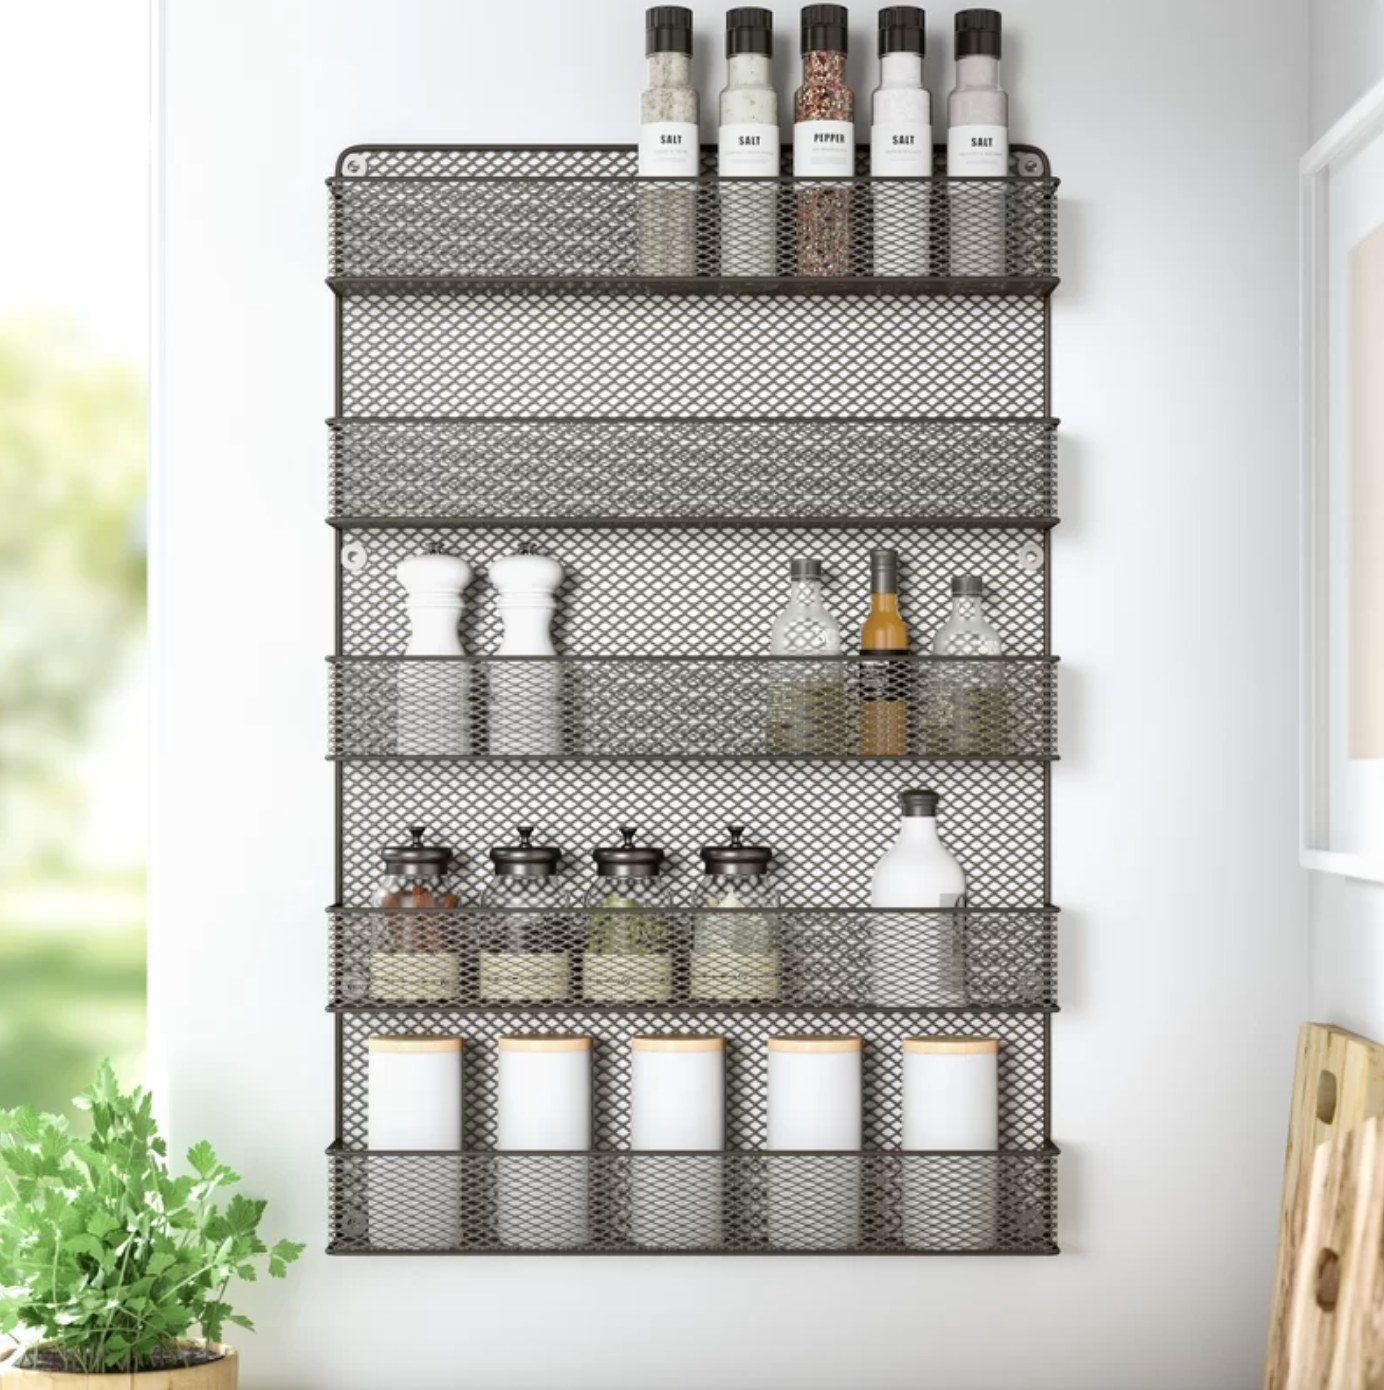 The spice rack is mounted on a white wall and has five rows holding various sizes bottles, and it&#x27;s all against some greenery in the background